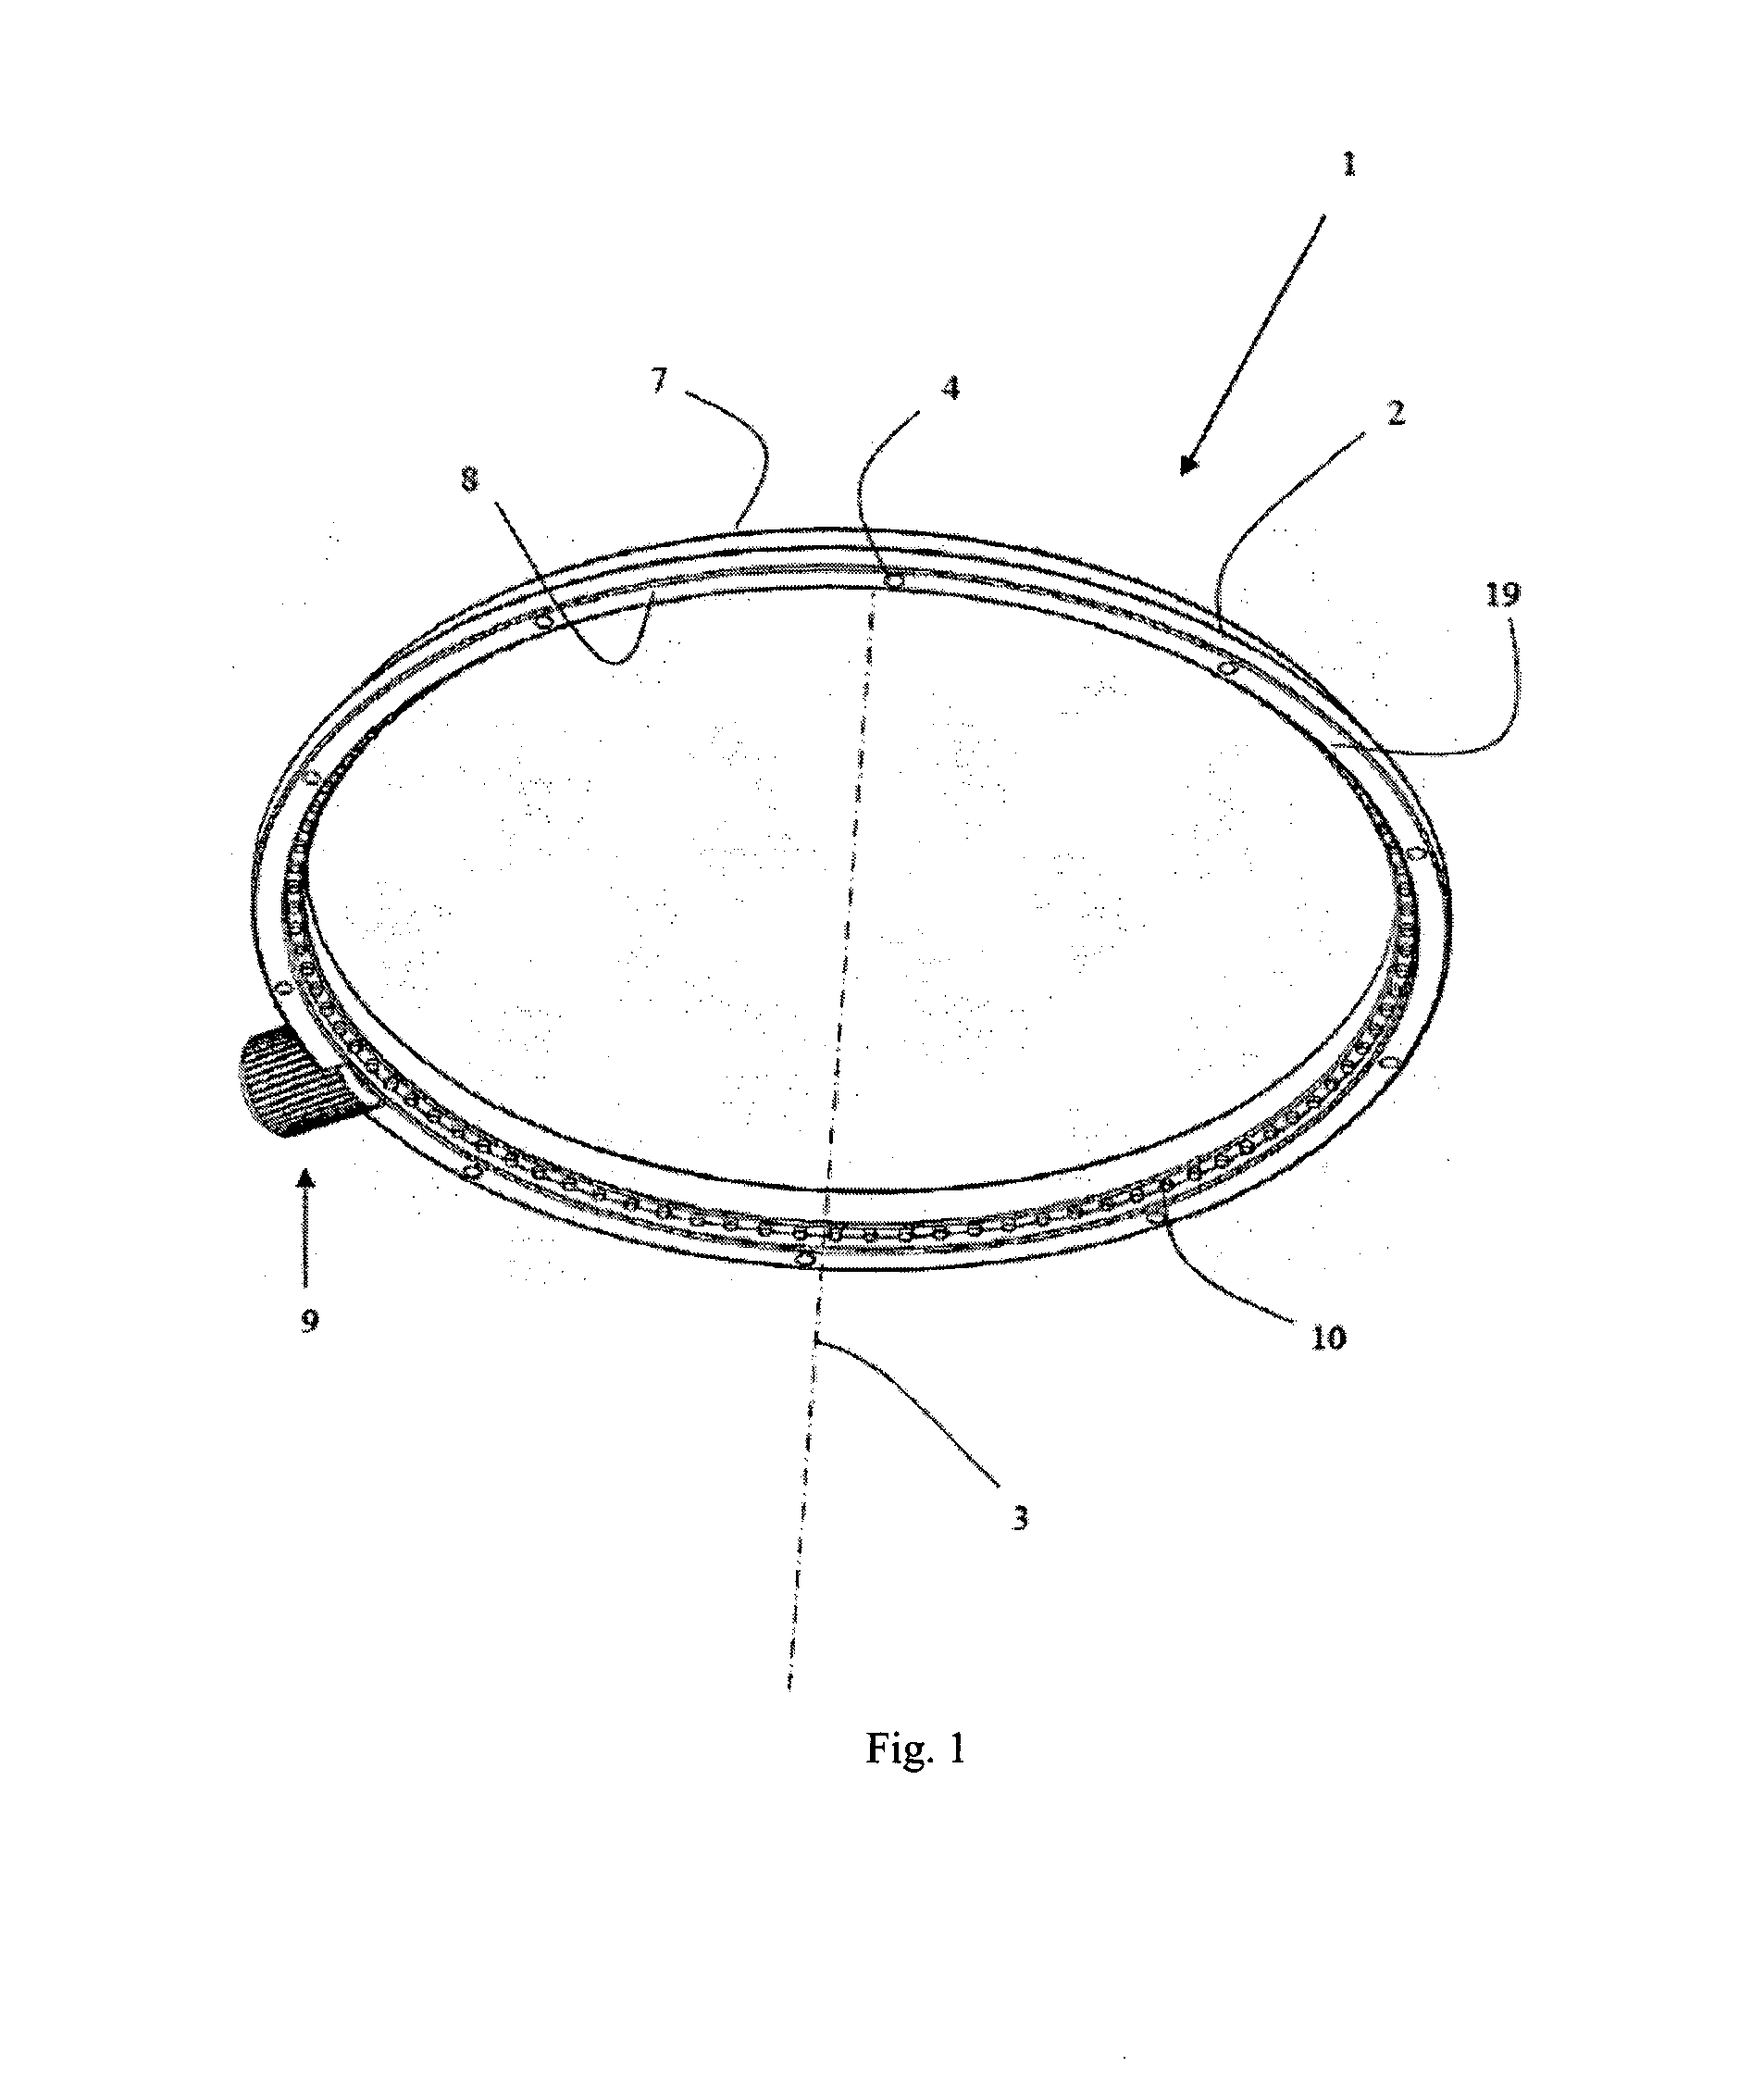 Tension Adjustment Hoop for a Membrane of a Musical Instrument